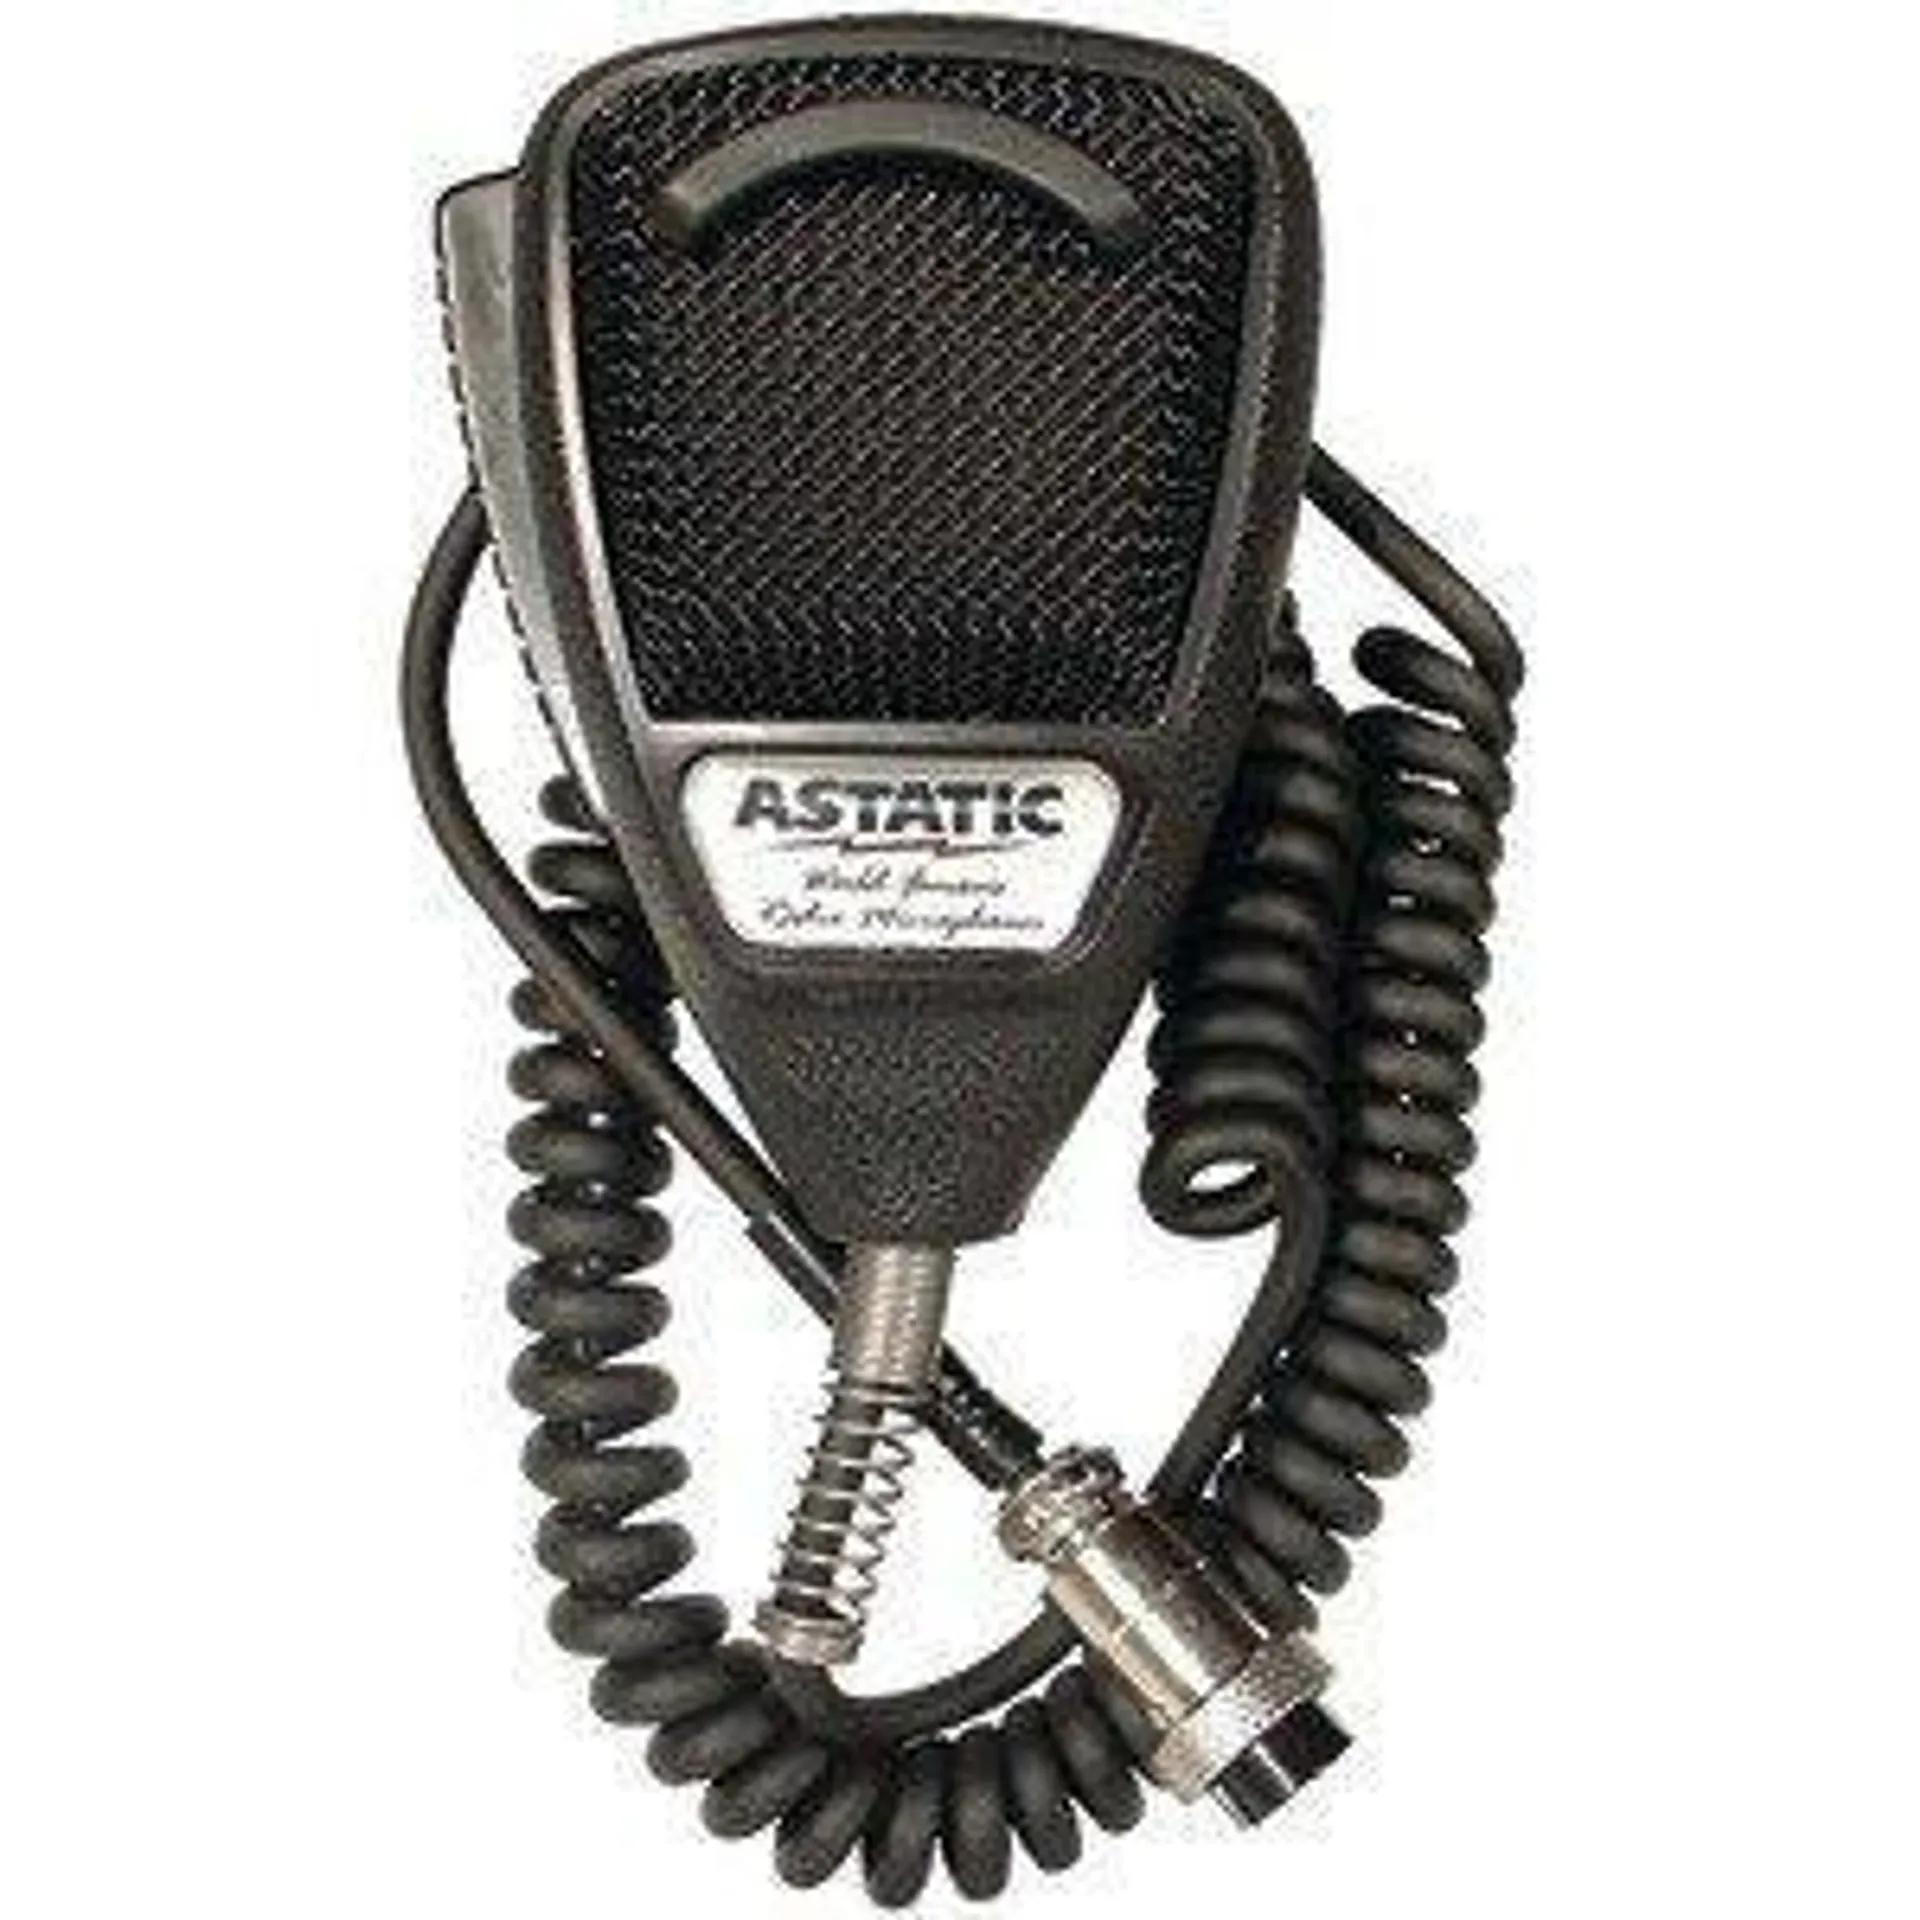 Maxpower 636L Noise Canceling 4-Pin CB Microphone Black